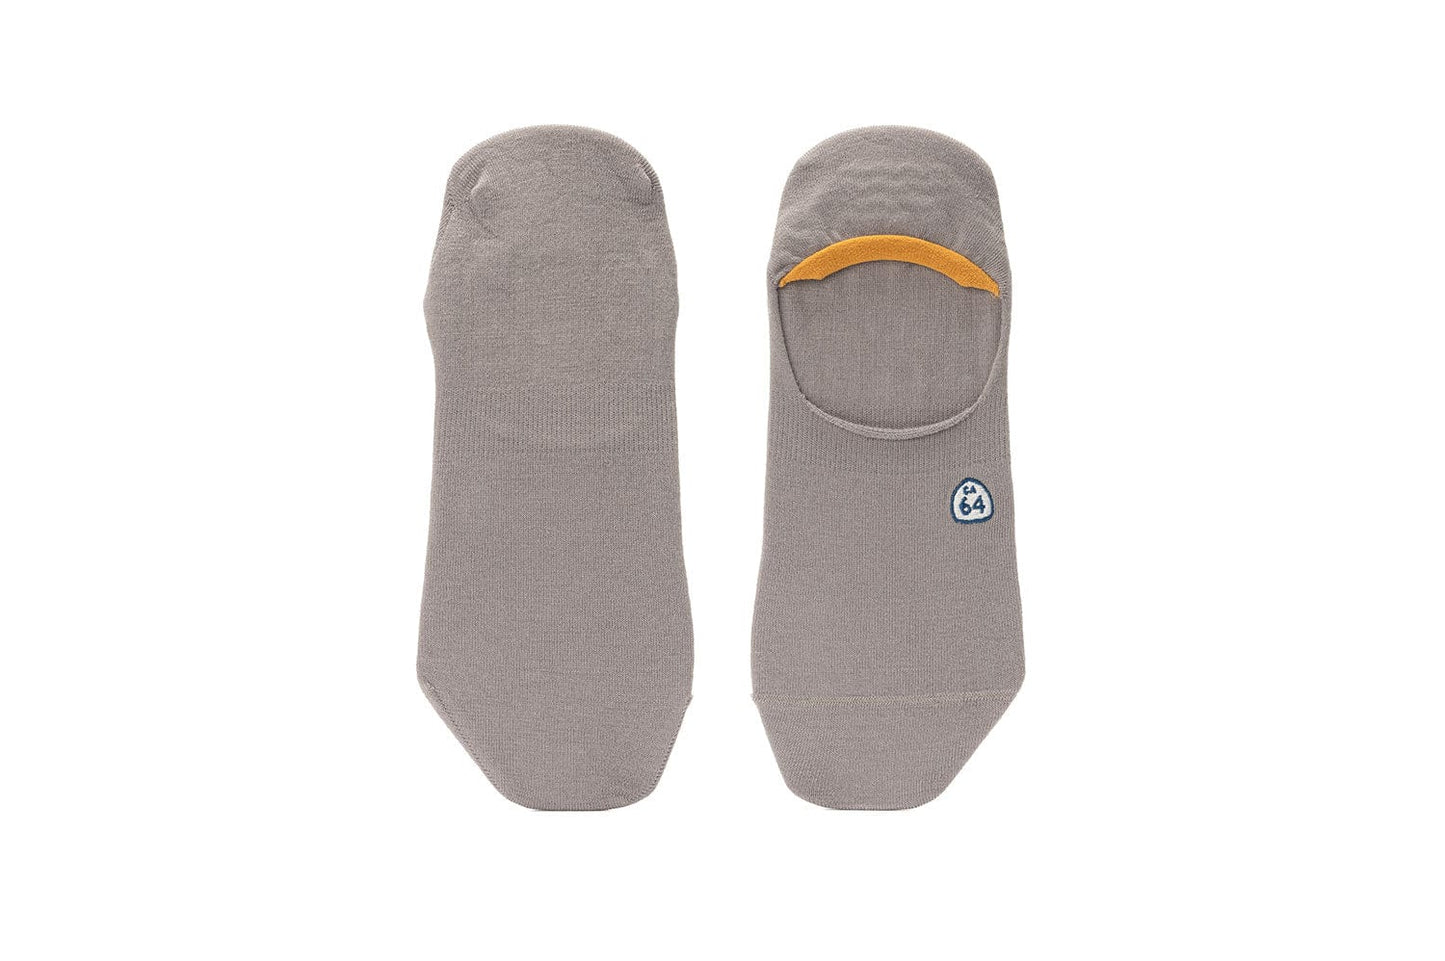 Mens Hideaways No Show Socks 2 Pack - Grey and Sand